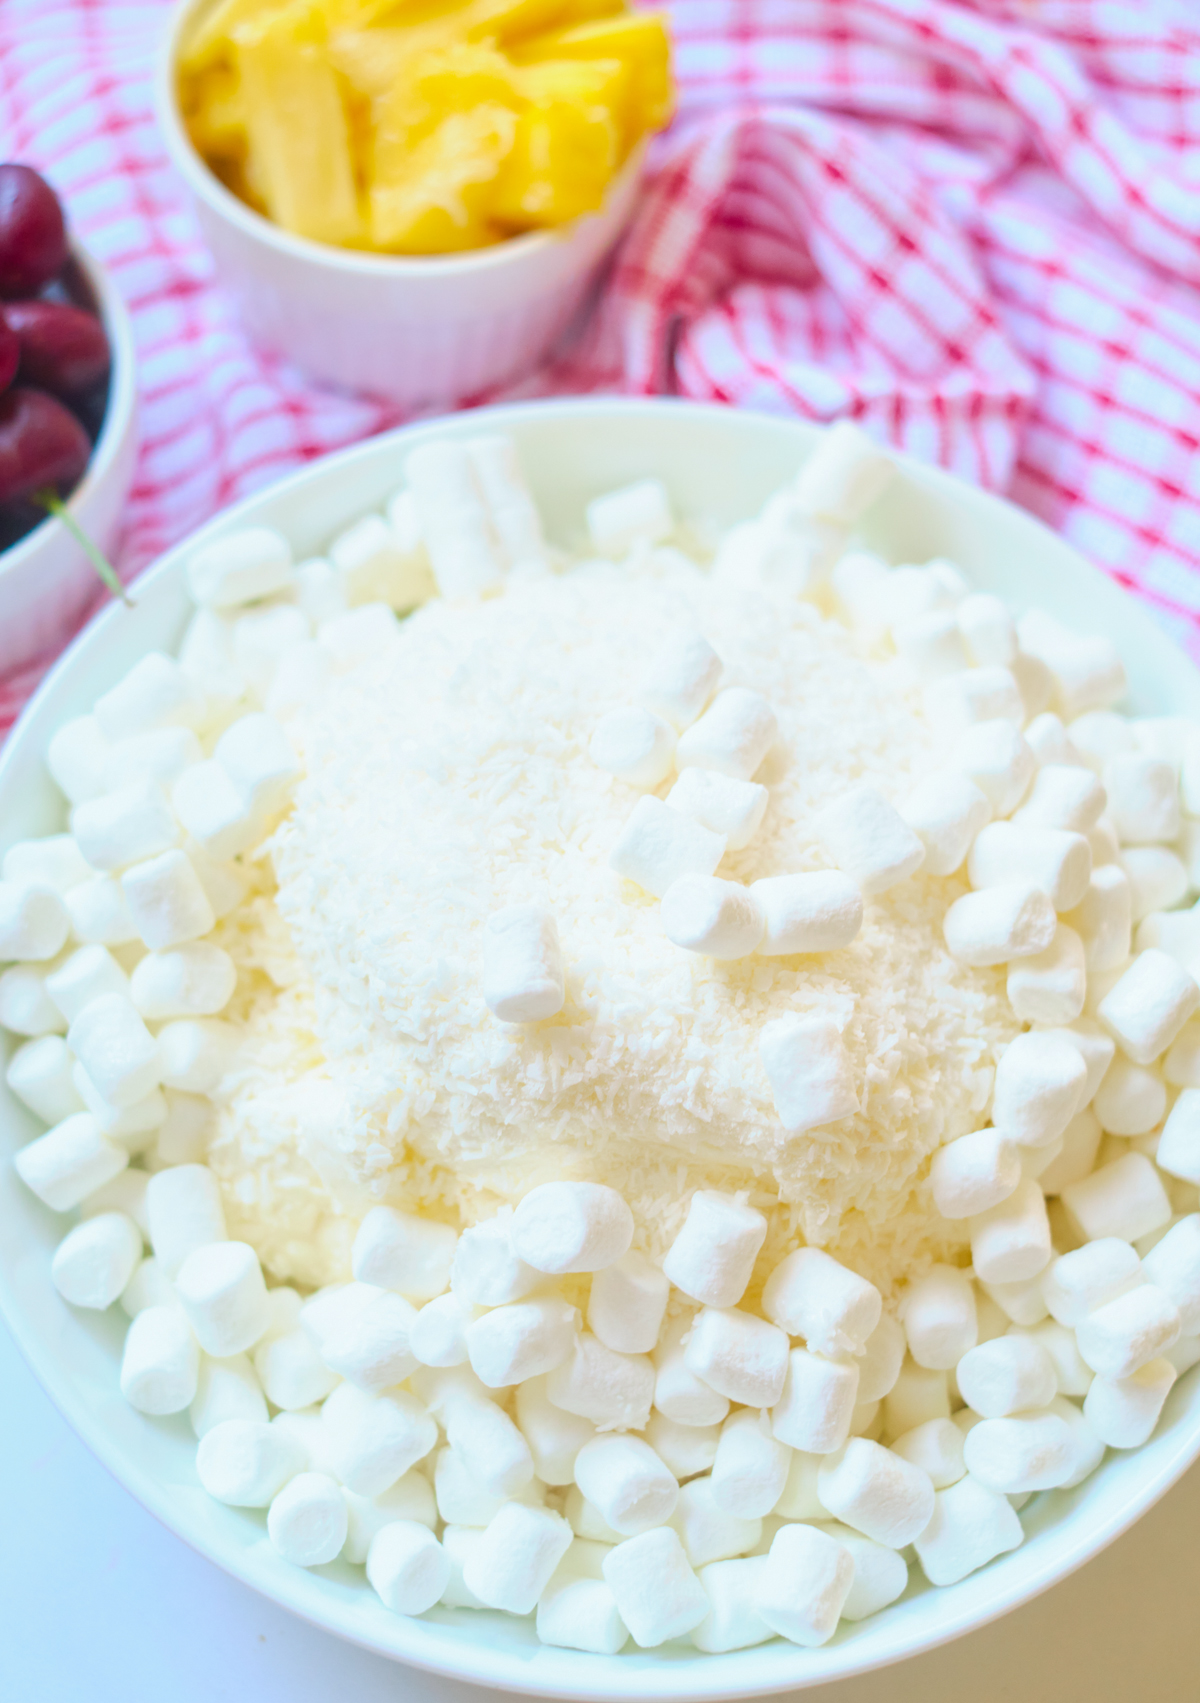 cherry pineapple fluff ingredients of cherries, marshmallows, whipping cream and more